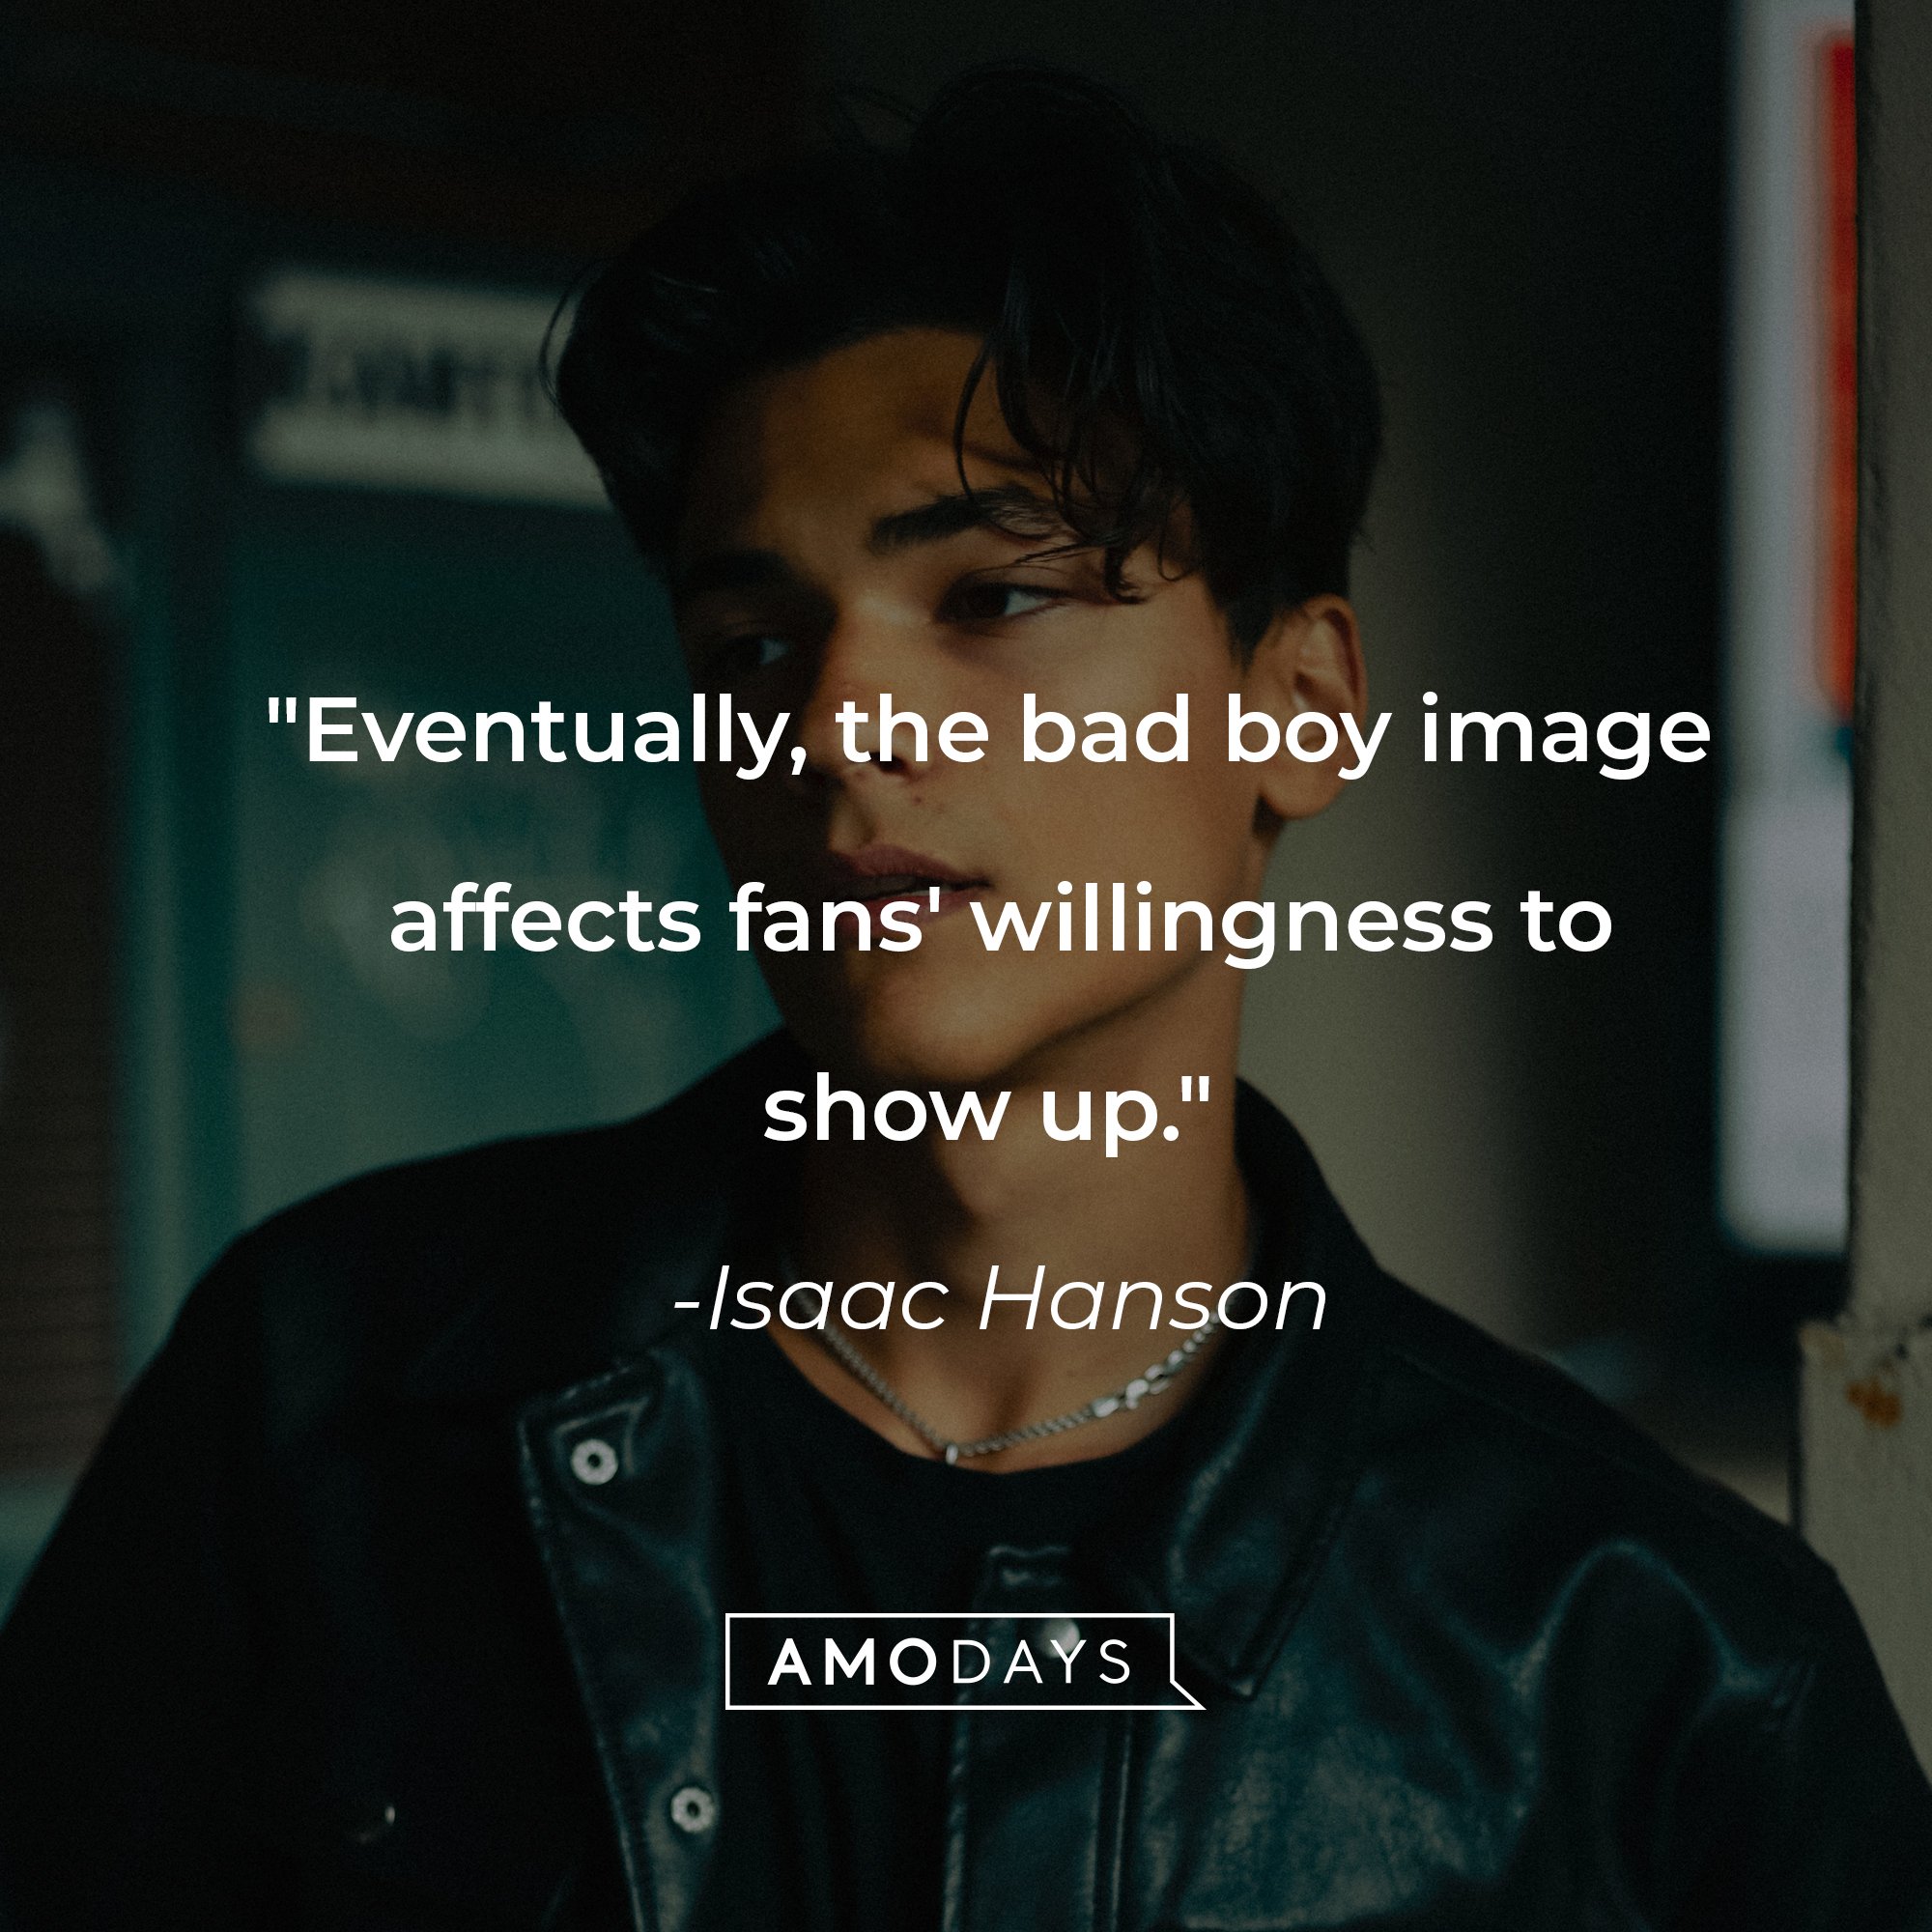 Isaac Hanson's quote: "Eventually, the bad boy image affects fans' willingness to show up." | Image: AmoDays